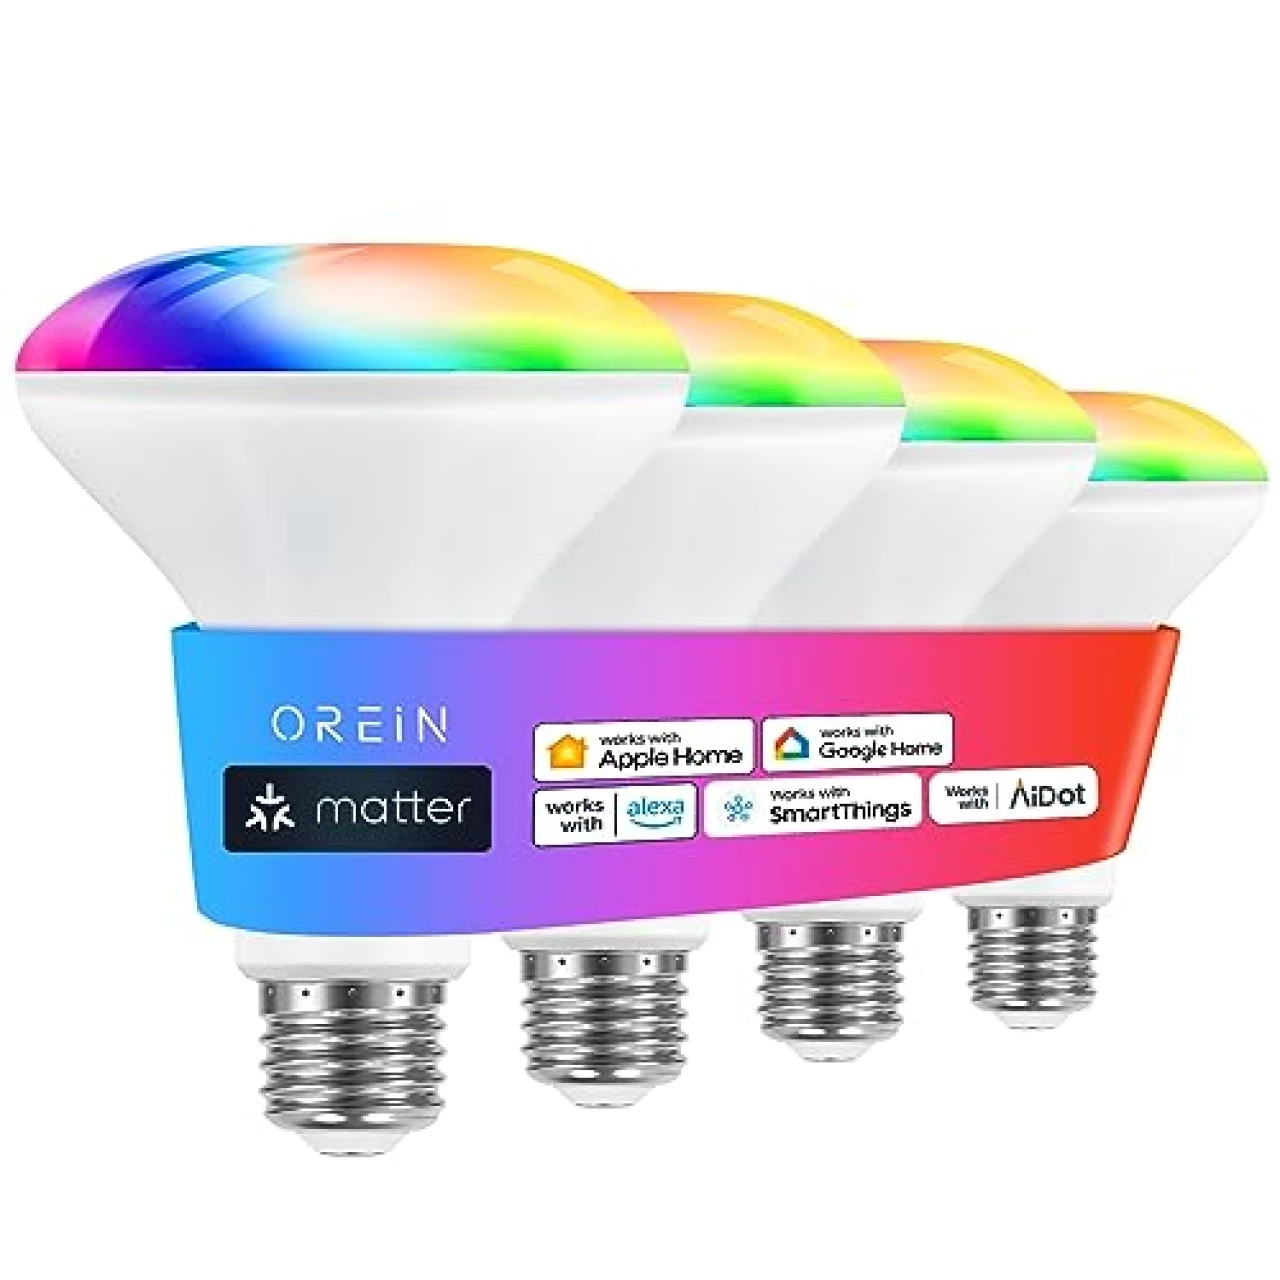 OREiN Matter Smart Light Bulbs Reliable WiFi Light Bulb with Matter BR30 LED Color Changing Light Bulbs 60W Equi 650LM CRI&gt;90&hellip;